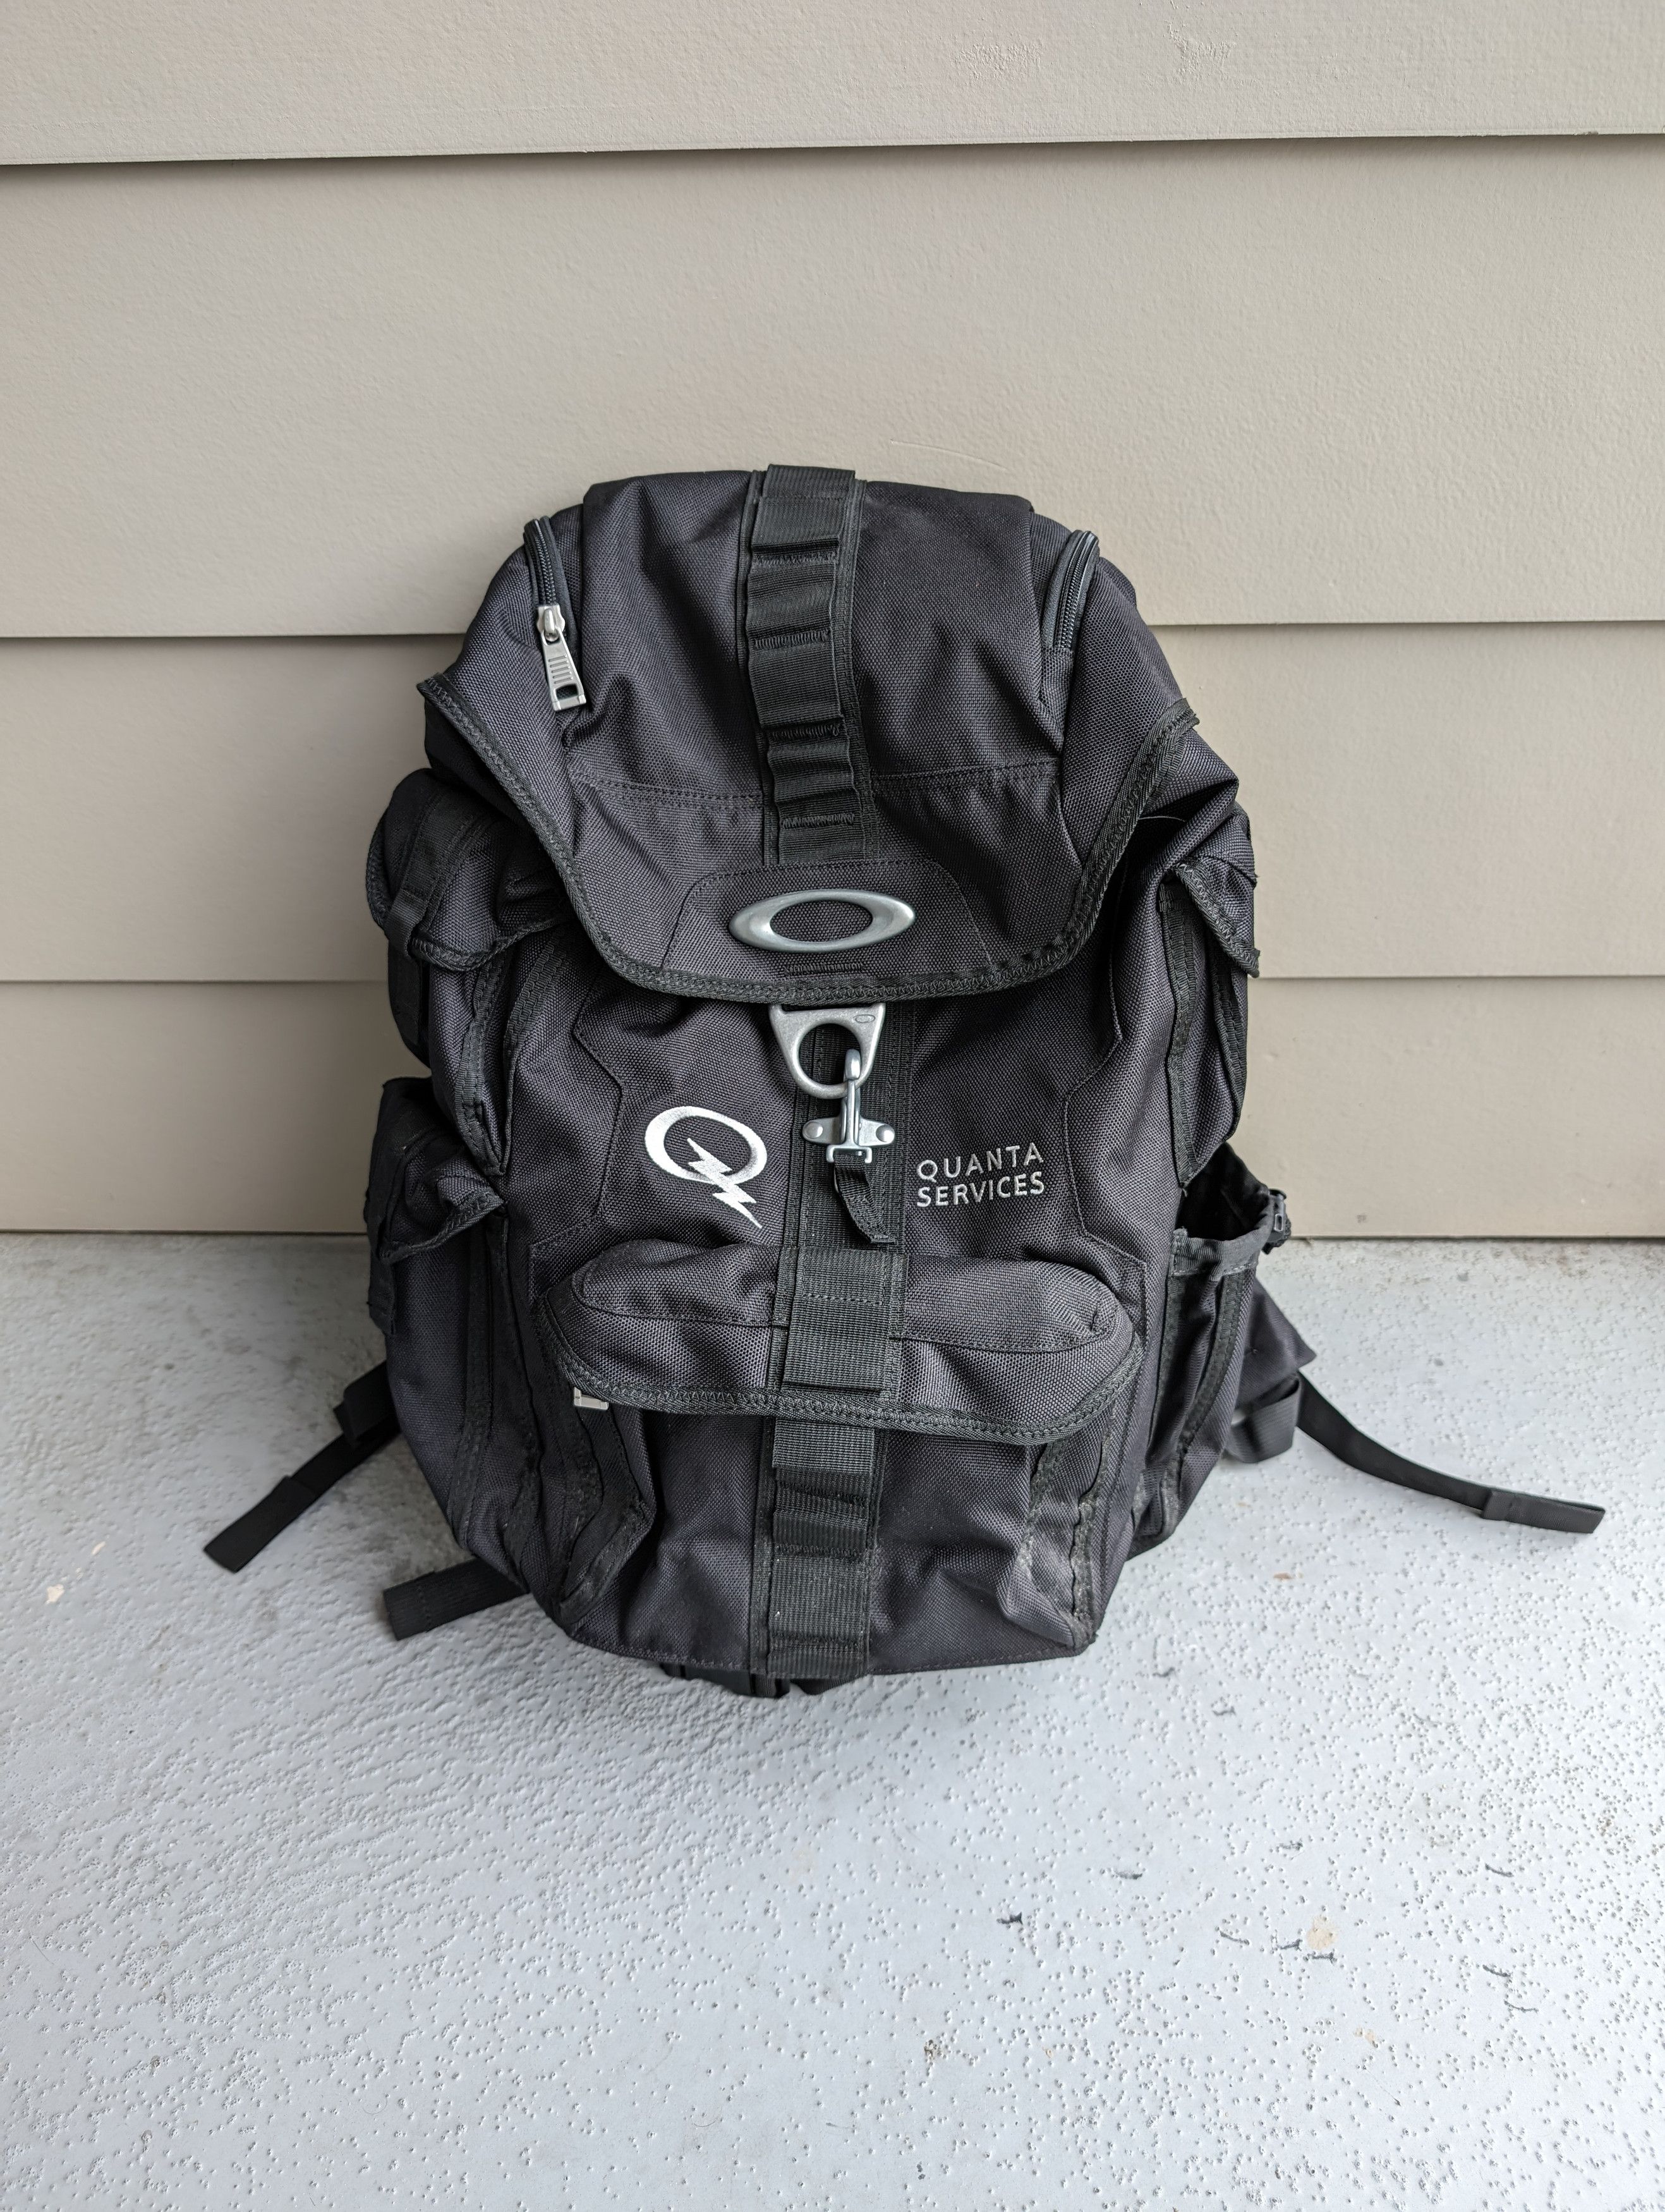 Pre-owned Oakley X Outdoor Life Oakley Tactical Black Backpack Excellent Condition